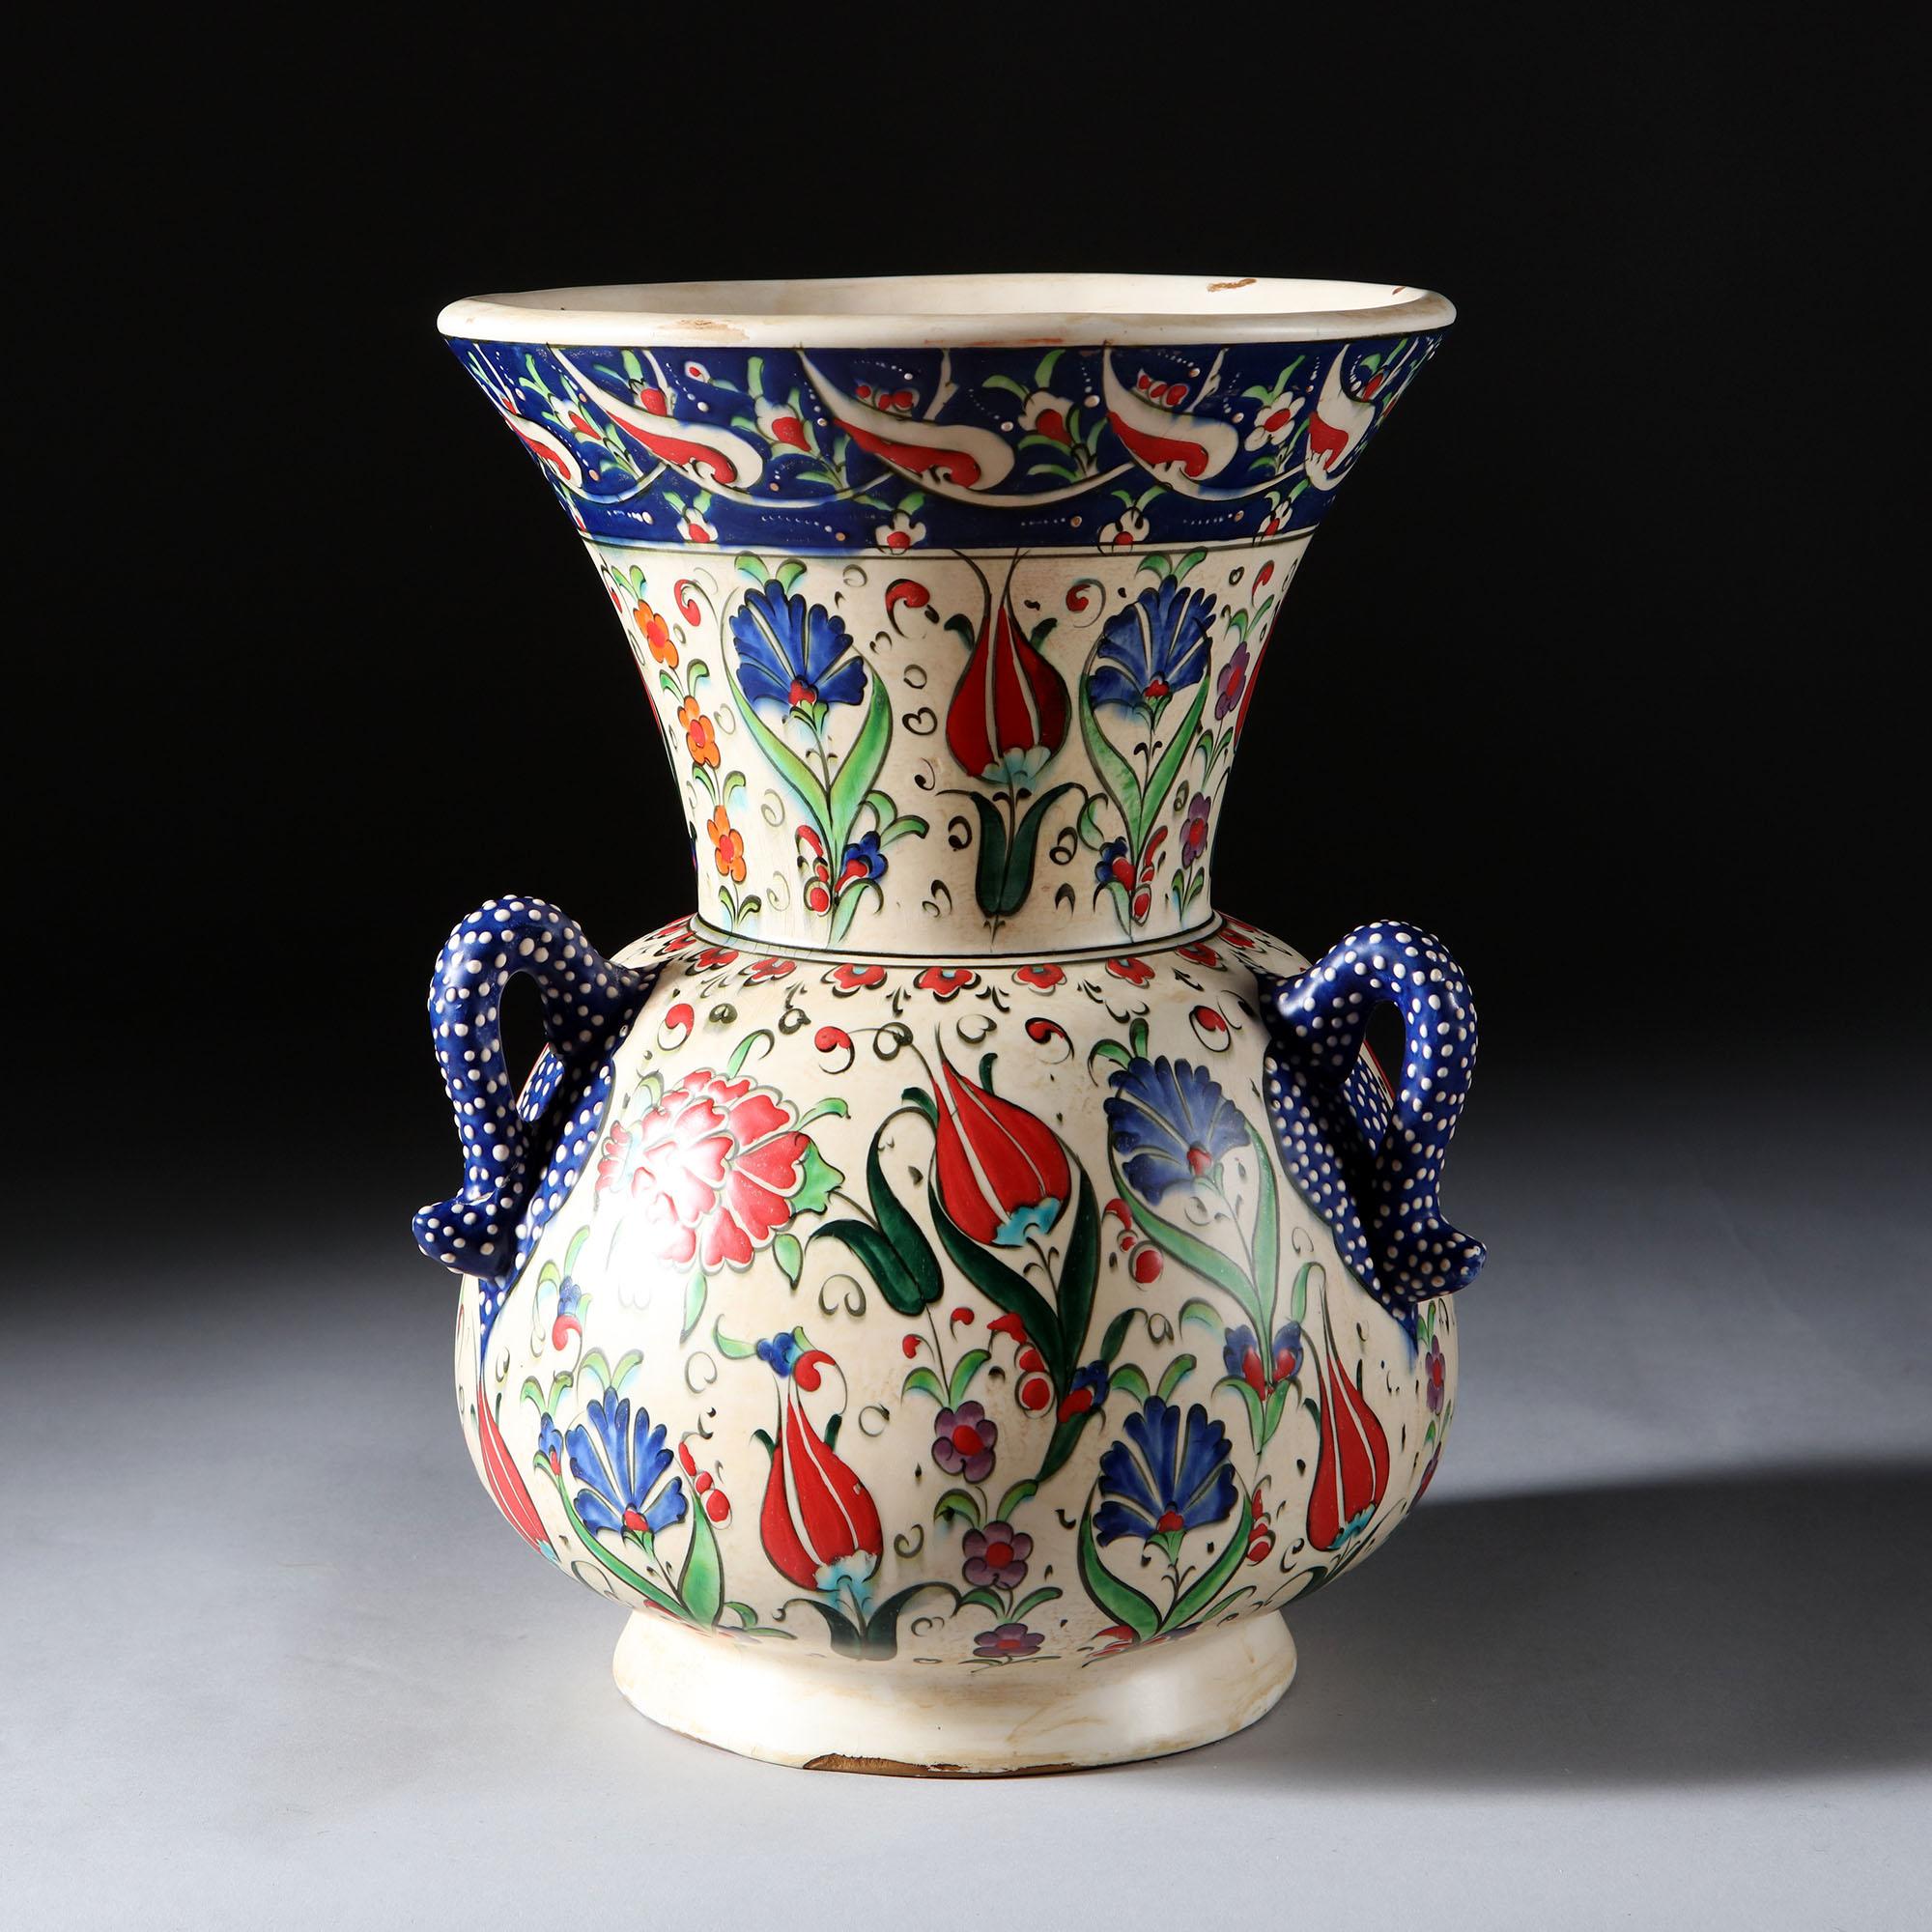 An early 20th century Islamic Mosque lamp in the Iznik style, painted in vivid colors with decoration of tulips and carnations, with three blue loop handles with white spots, now converted as a lamp.

Currently wired for the UK. Please enquire for